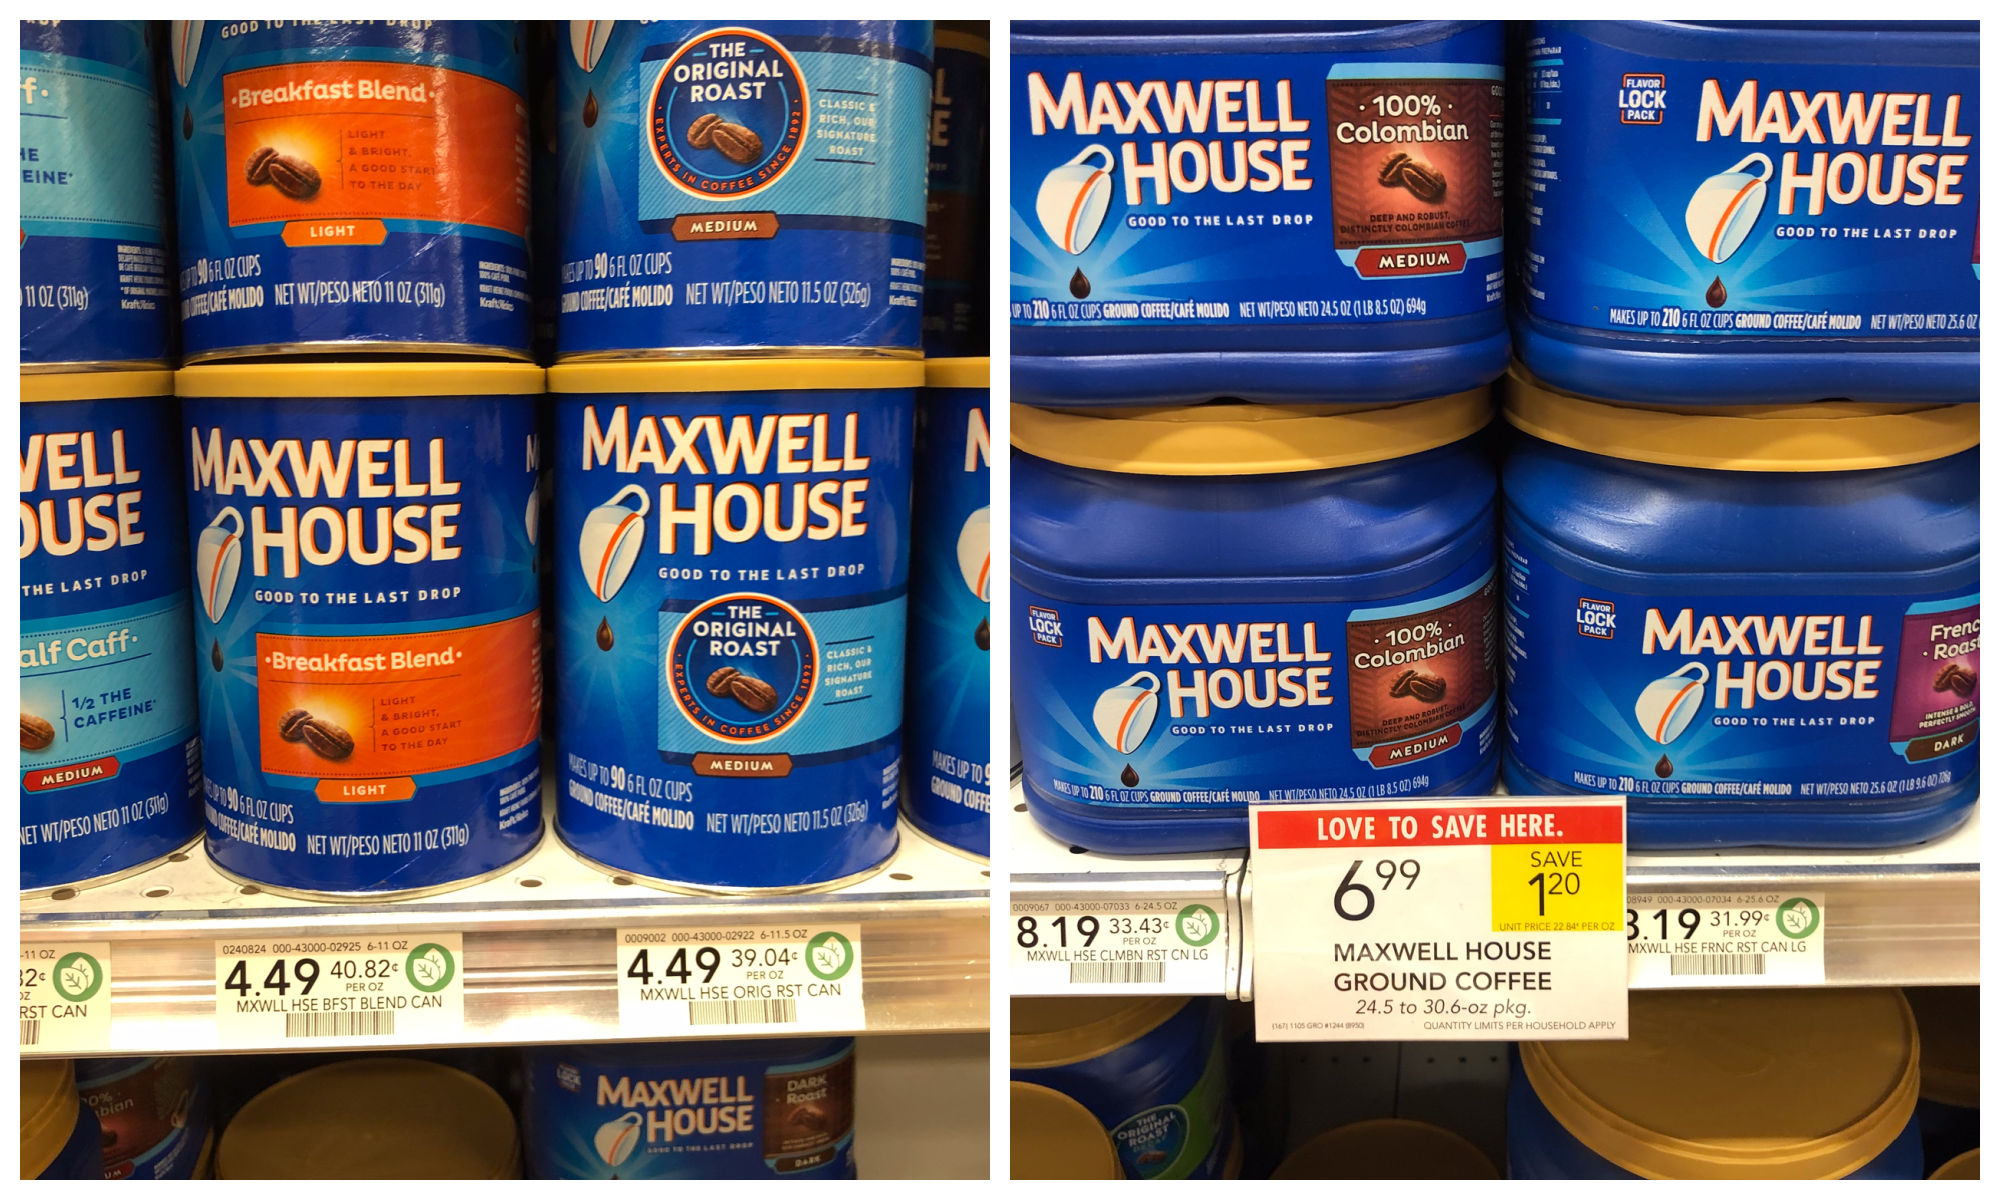 Fantastic Deal On Maxwell House Coffee - Small Cans $2.29 And Big Cans Just $4.99 At Publix on I Heart Publix